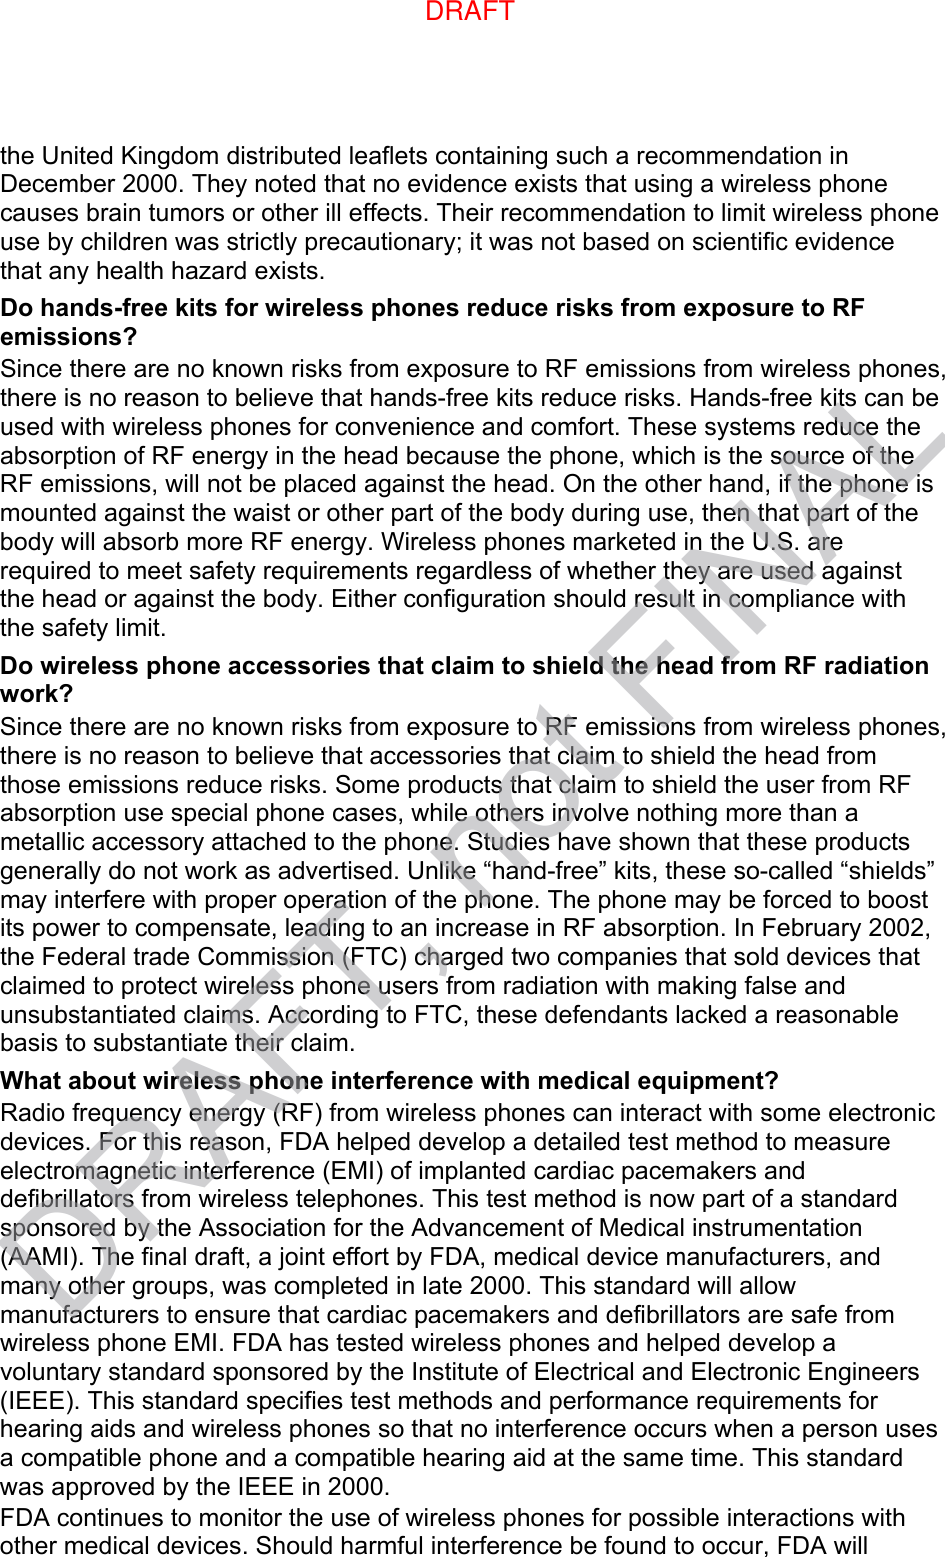 the United Kingdom distributed leaflets containing such a recommendation in December 2000. They noted that no evidence exists that using a wireless phone causes brain tumors or other ill effects. Their recommendation to limit wireless phone use by children was strictly precautionary; it was not based on scientific evidence that any health hazard exists.   Do hands-free kits for wireless phones reduce risks from exposure to RF emissions? Since there are no known risks from exposure to RF emissions from wireless phones, there is no reason to believe that hands-free kits reduce risks. Hands-free kits can be used with wireless phones for convenience and comfort. These systems reduce the absorption of RF energy in the head because the phone, which is the source of the RF emissions, will not be placed against the head. On the other hand, if the phone is mounted against the waist or other part of the body during use, then that part of the body will absorb more RF energy. Wireless phones marketed in the U.S. are required to meet safety requirements regardless of whether they are used against the head or against the body. Either configuration should result in compliance with the safety limit. Do wireless phone accessories that claim to shield the head from RF radiation work? Since there are no known risks from exposure to RF emissions from wireless phones, there is no reason to believe that accessories that claim to shield the head from those emissions reduce risks. Some products that claim to shield the user from RF absorption use special phone cases, while others involve nothing more than a metallic accessory attached to the phone. Studies have shown that these products generally do not work as advertised. Unlike “hand-free” kits, these so-called “shields” may interfere with proper operation of the phone. The phone may be forced to boost its power to compensate, leading to an increase in RF absorption. In February 2002, the Federal trade Commission (FTC) charged two companies that sold devices that claimed to protect wireless phone users from radiation with making false and unsubstantiated claims. According to FTC, these defendants lacked a reasonable basis to substantiate their claim. What about wireless phone interference with medical equipment? Radio frequency energy (RF) from wireless phones can interact with some electronic devices. For this reason, FDA helped develop a detailed test method to measure electromagnetic interference (EMI) of implanted cardiac pacemakers and defibrillators from wireless telephones. This test method is now part of a standard sponsored by the Association for the Advancement of Medical instrumentation (AAMI). The final draft, a joint effort by FDA, medical device manufacturers, and many other groups, was completed in late 2000. This standard will allow manufacturers to ensure that cardiac pacemakers and defibrillators are safe from wireless phone EMI. FDA has tested wireless phones and helped develop a voluntary standard sponsored by the Institute of Electrical and Electronic Engineers (IEEE). This standard specifies test methods and performance requirements for hearing aids and wireless phones so that no interference occurs when a person uses a compatible phone and a compatible hearing aid at the same time. This standard was approved by the IEEE in 2000. FDA continues to monitor the use of wireless phones for possible interactions with other medical devices. Should harmful interference be found to occur, FDA will DRAFT, not FINALDRAFT